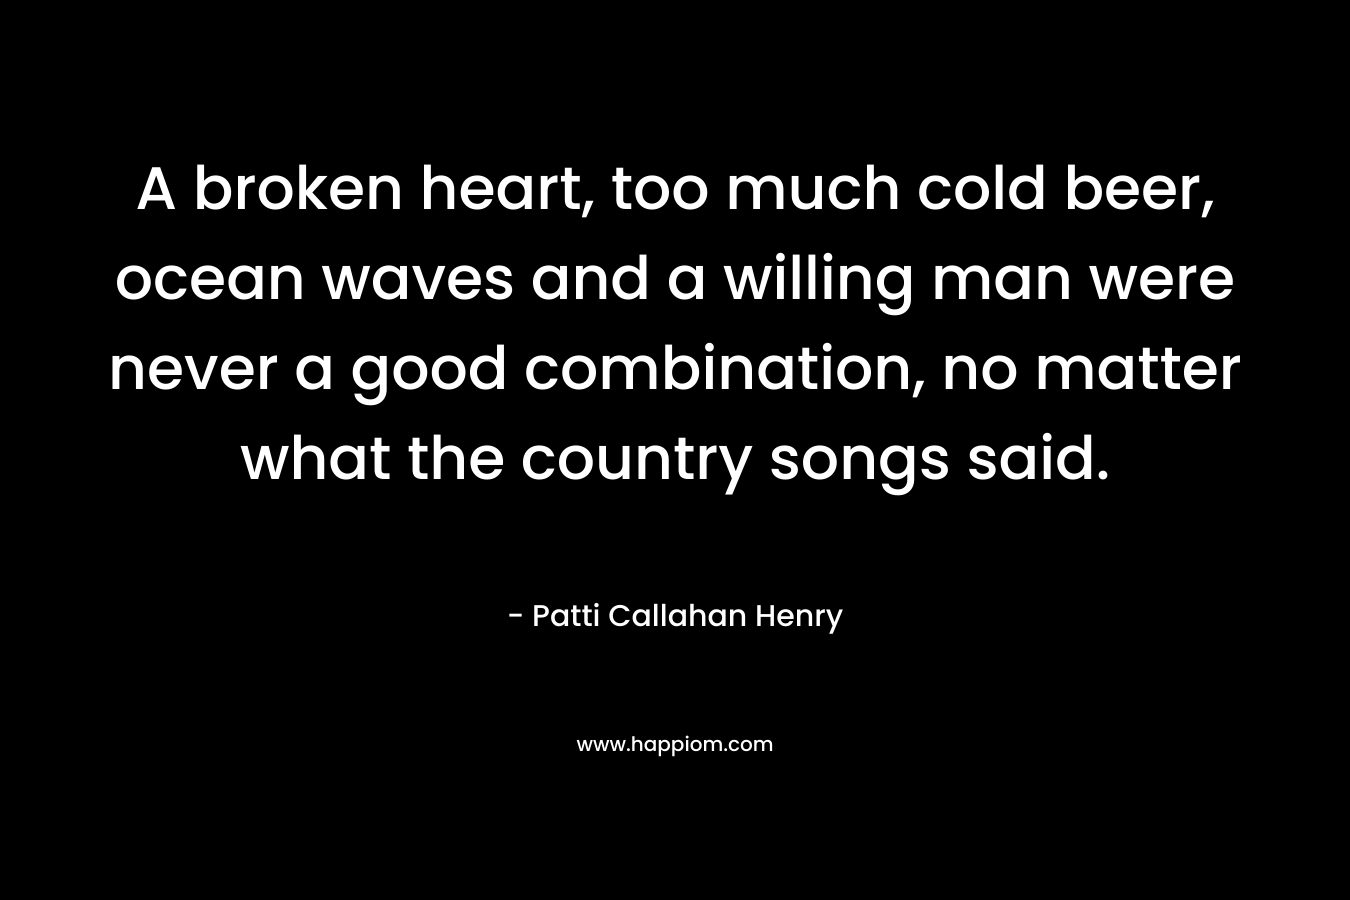 A broken heart, too much cold beer, ocean waves and a willing man were never a good combination, no matter what the country songs said. – Patti Callahan Henry